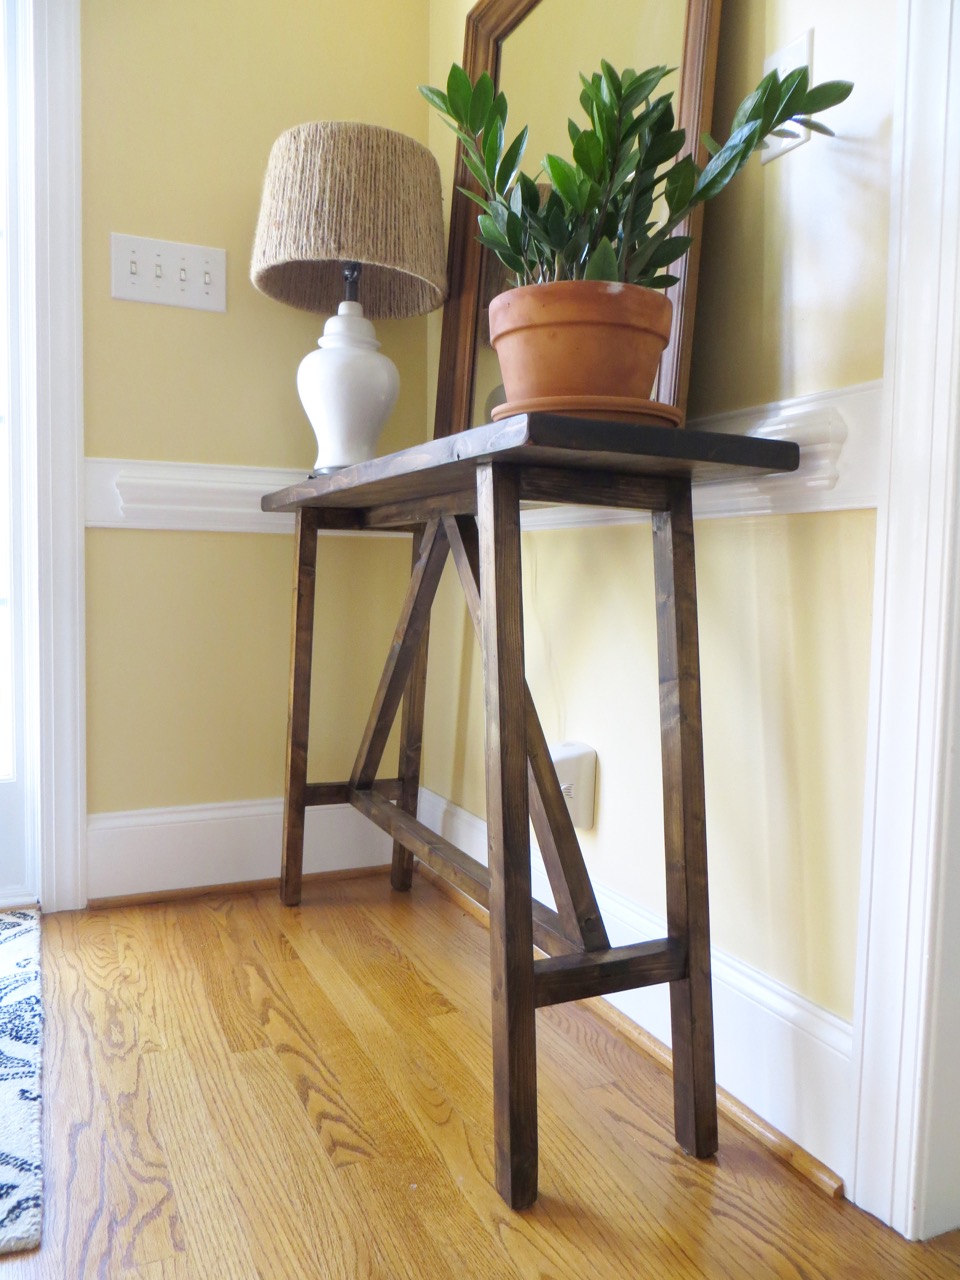 The Project Lady - DIY – Tutorial for Making a Basic Entryway Table